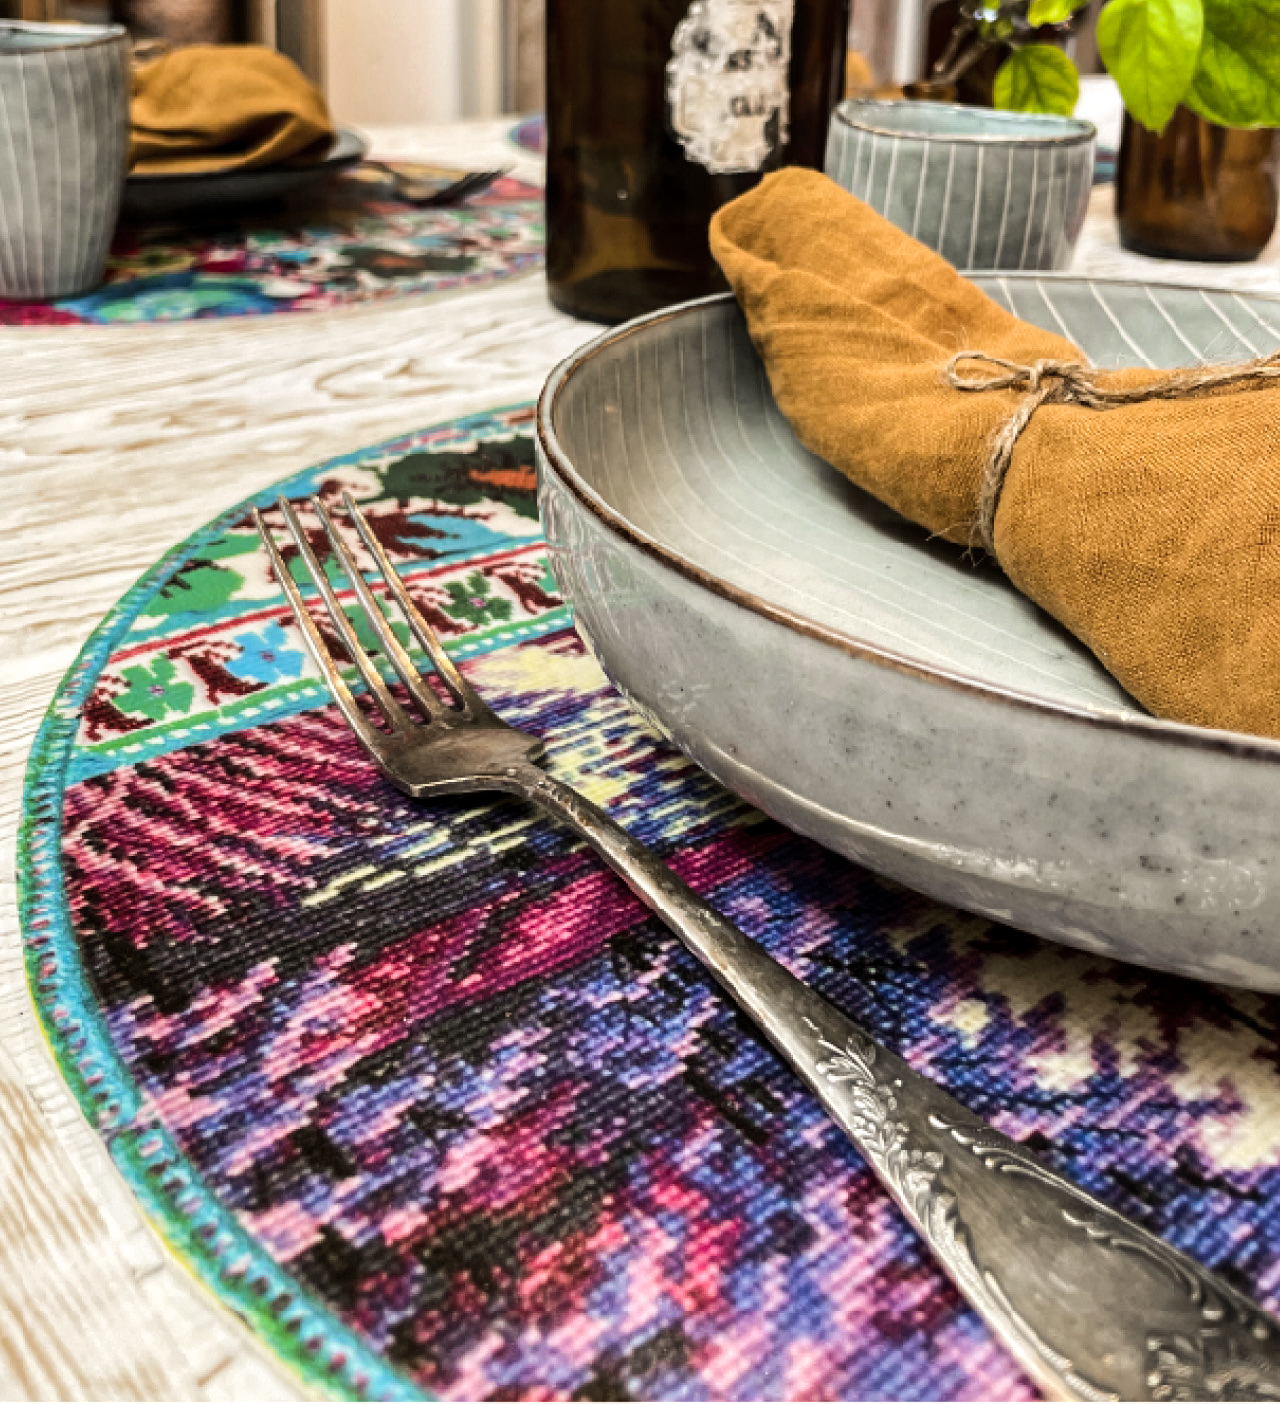 Gipsy Vinyl Placemat Image